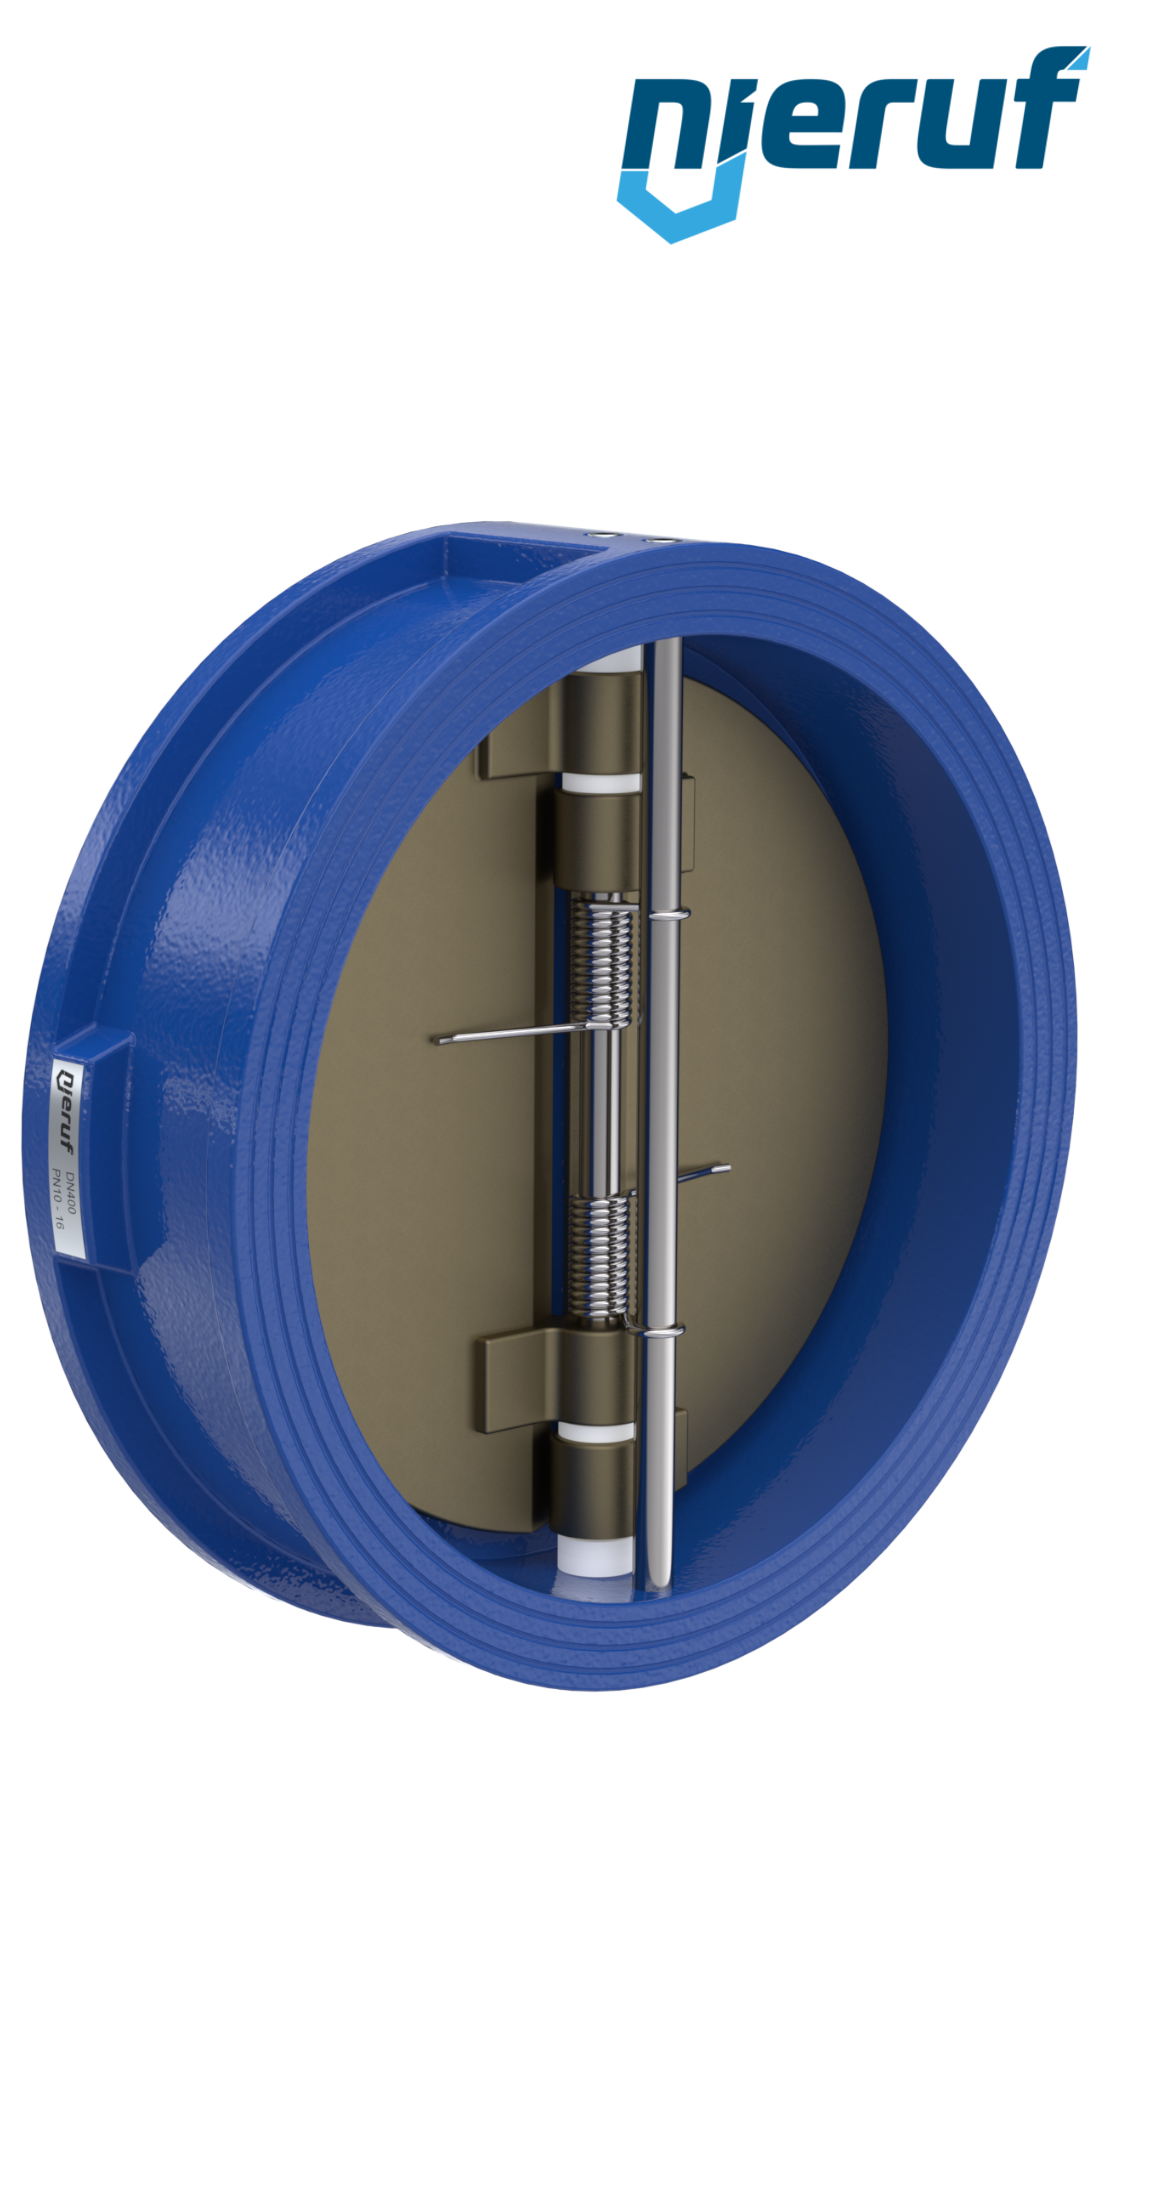 dual plate check valve DN400 DR04 ANSI 150 GGG40 epoxyd plated blue 180µm FKM